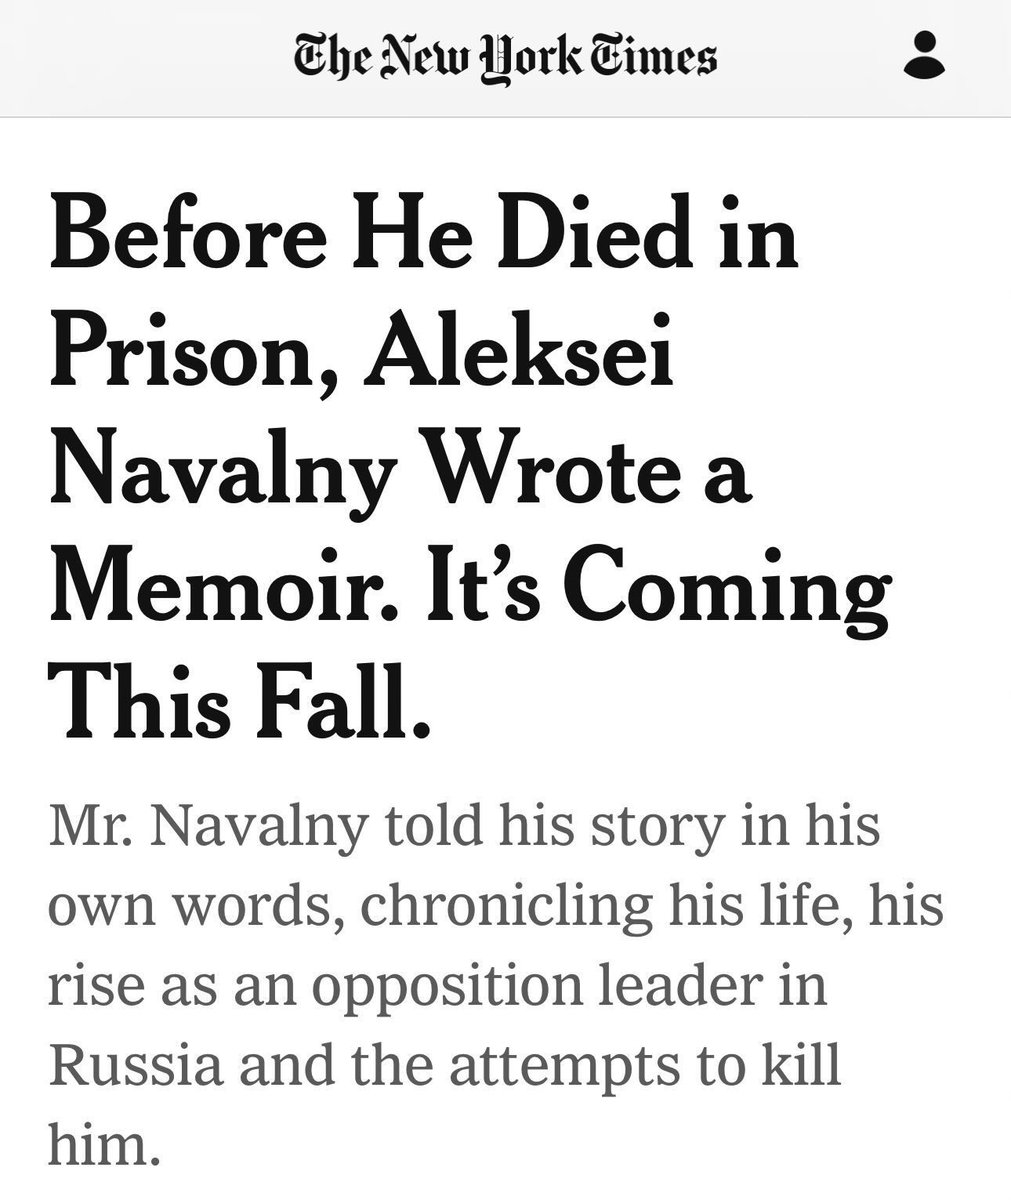 “Died”?? This hero was murdered in prison, and yet, Congressional Republicans still have not delivered aid to Ukraine. Putin took Navalny’s life for standing against him, and Ukraine stands against Putin. We must stand with Ukraine.